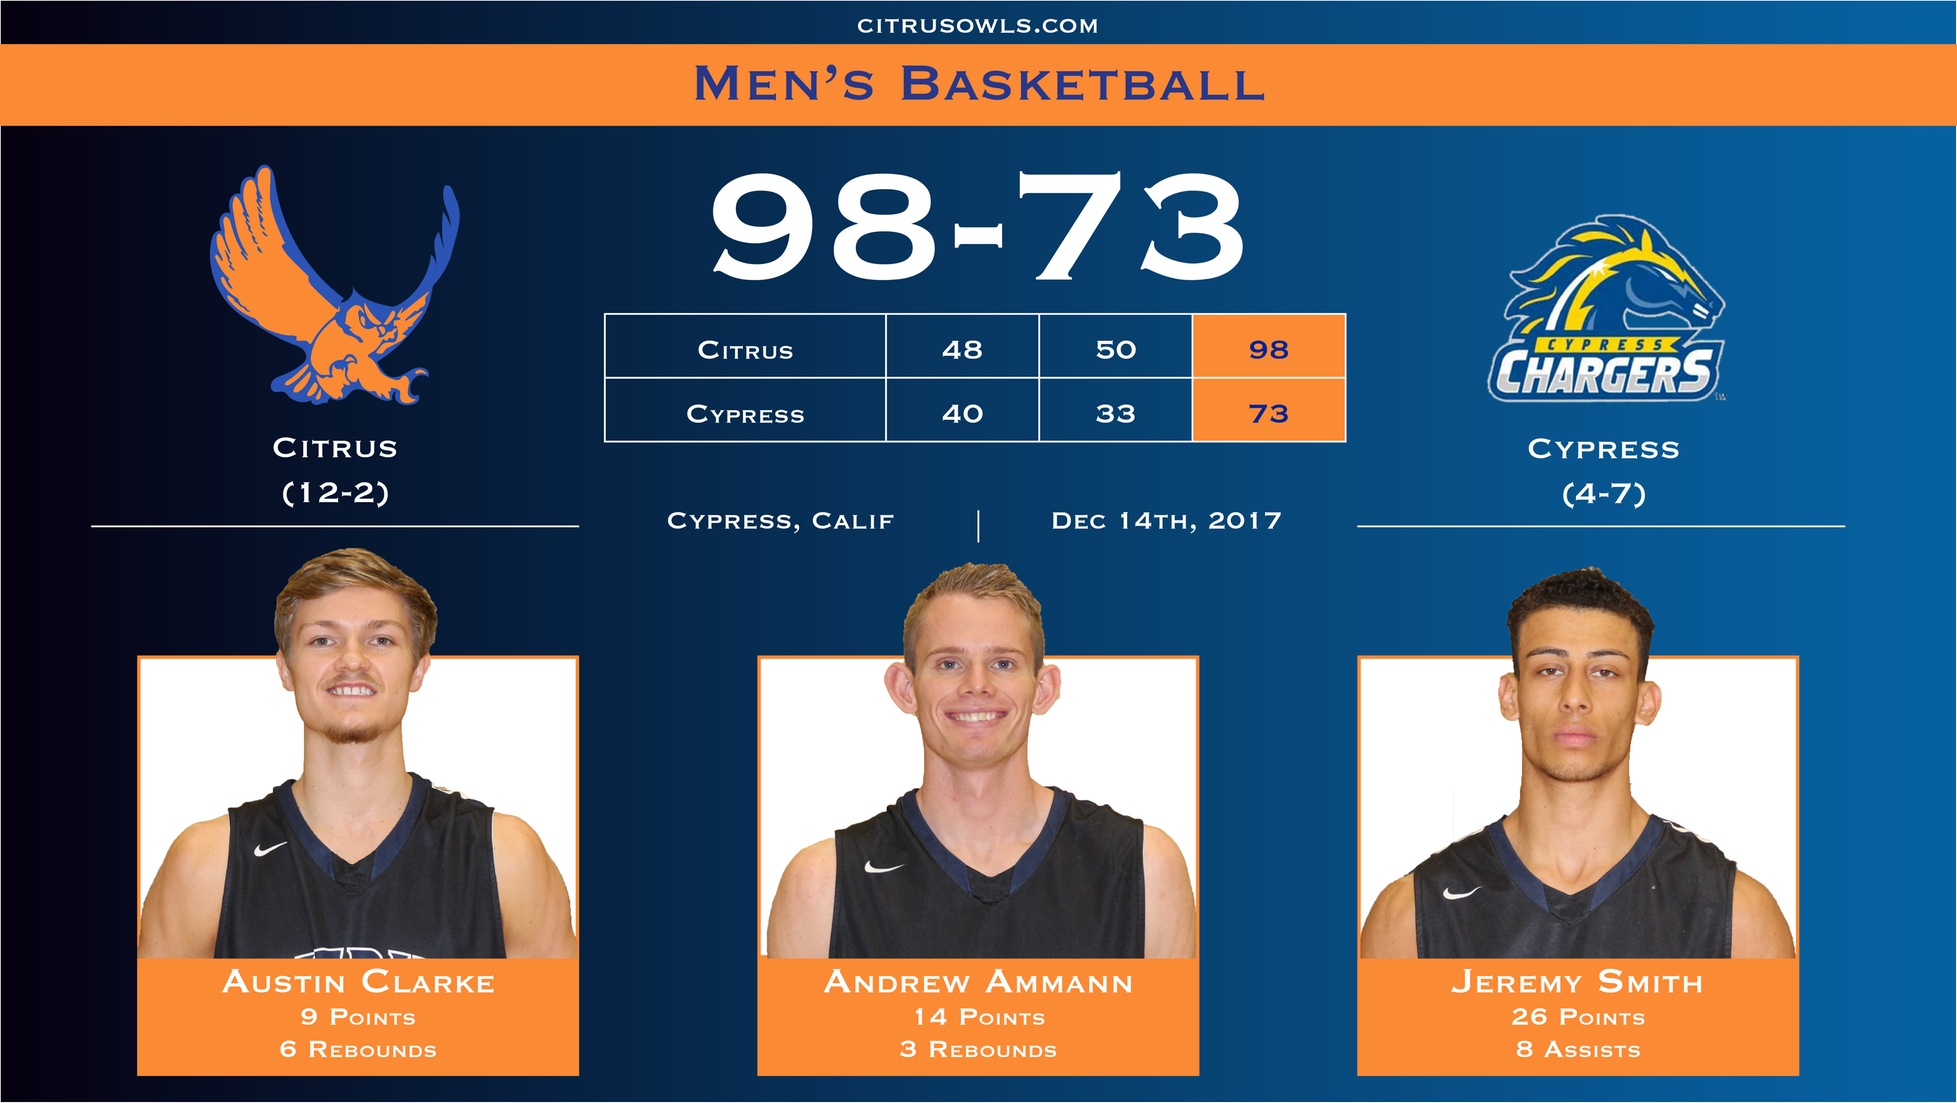 Citrus Men Win Ninth Straight in Blowout of Cypress